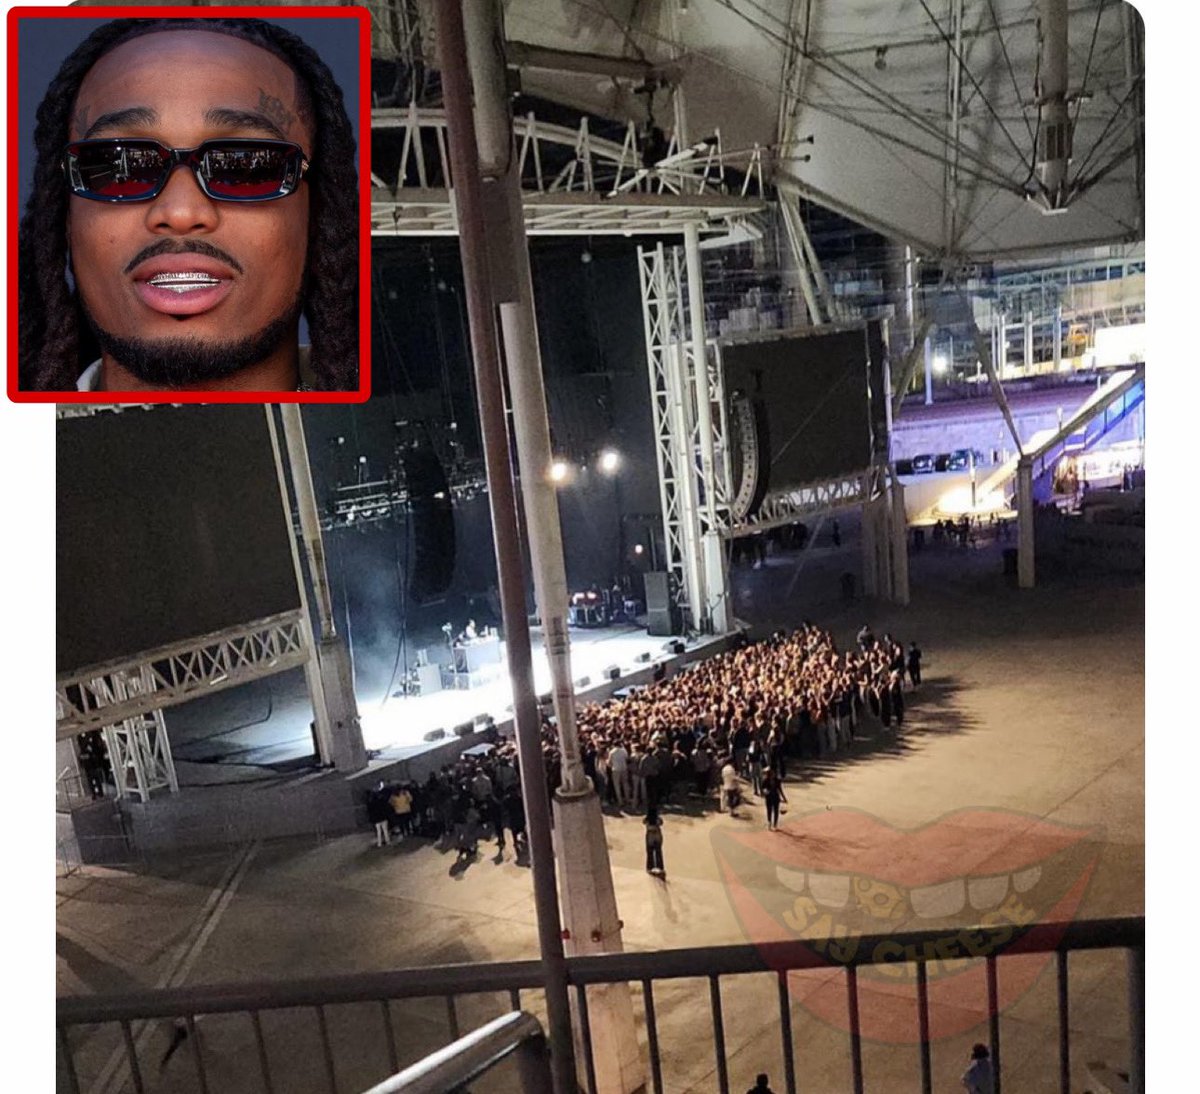 Quavo’s concert in Connecticut is going viral on social media